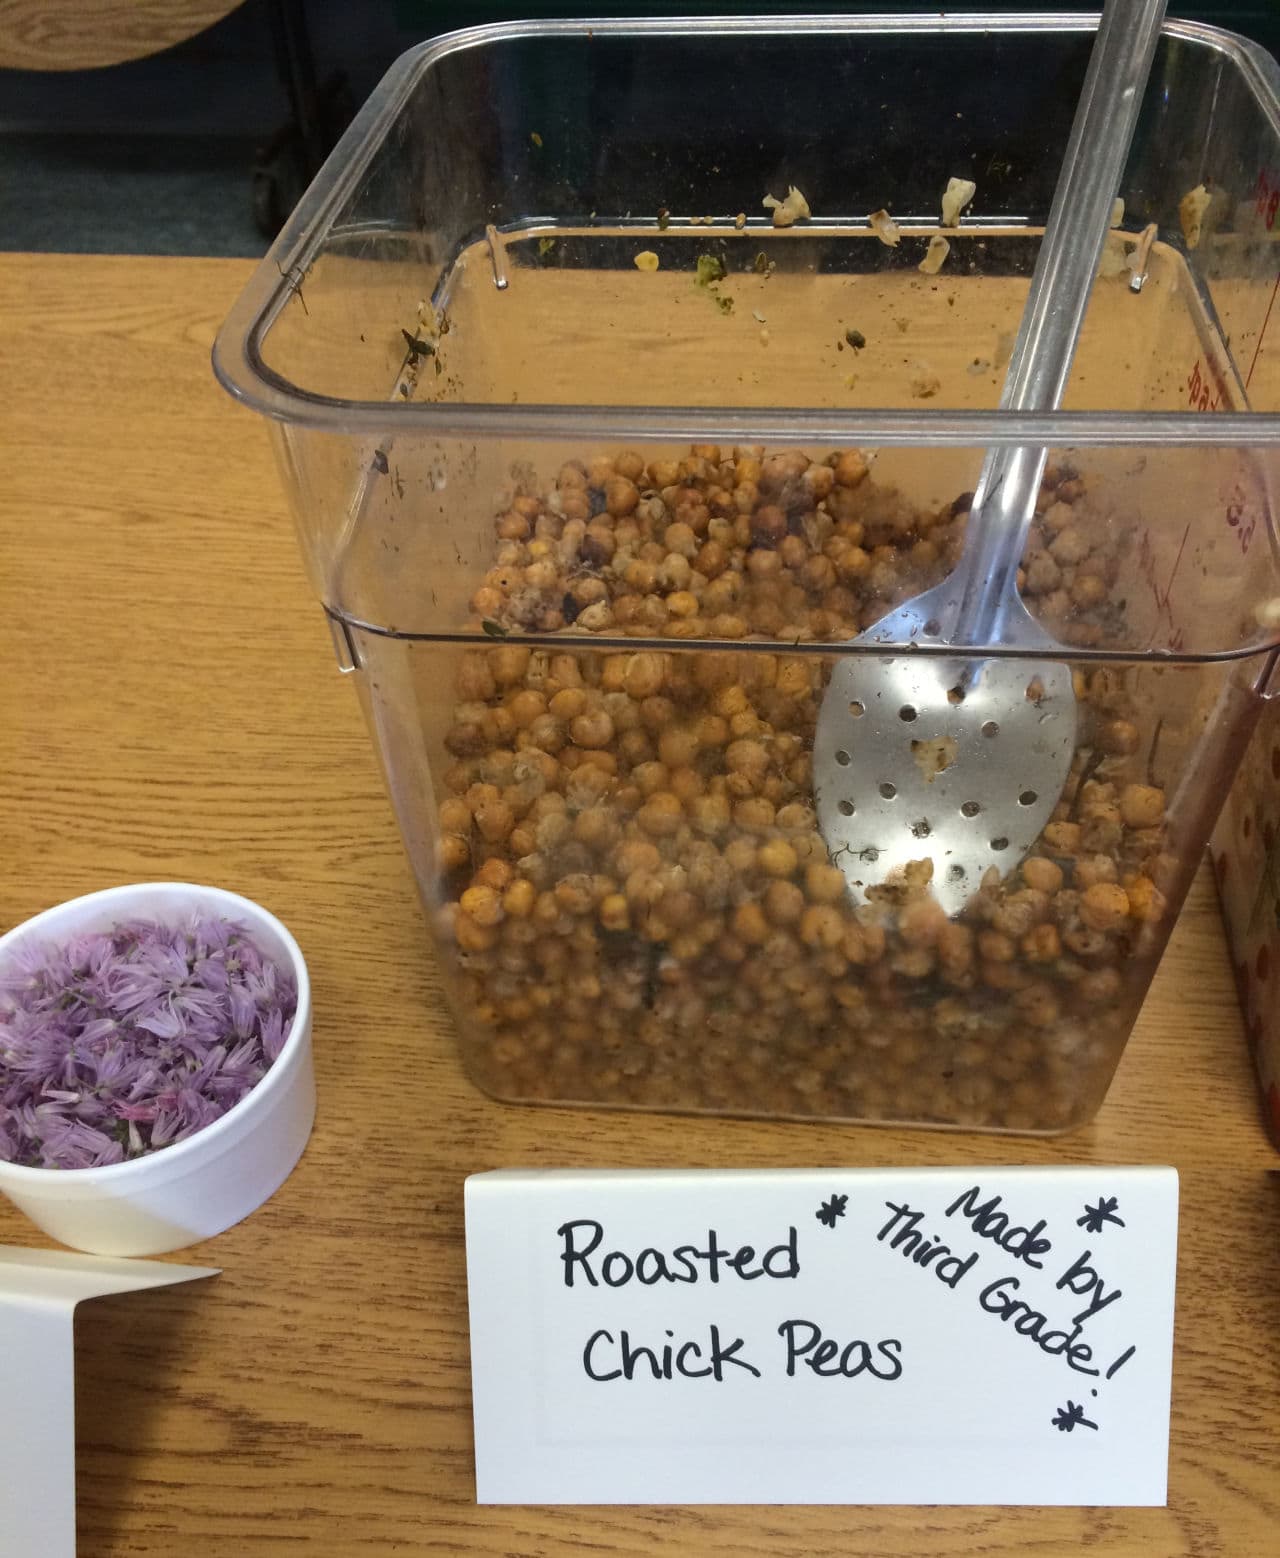 Chickpeas are a great source of protein and an easy side dish for kids to make. (Kathy Gunst/WBUR)